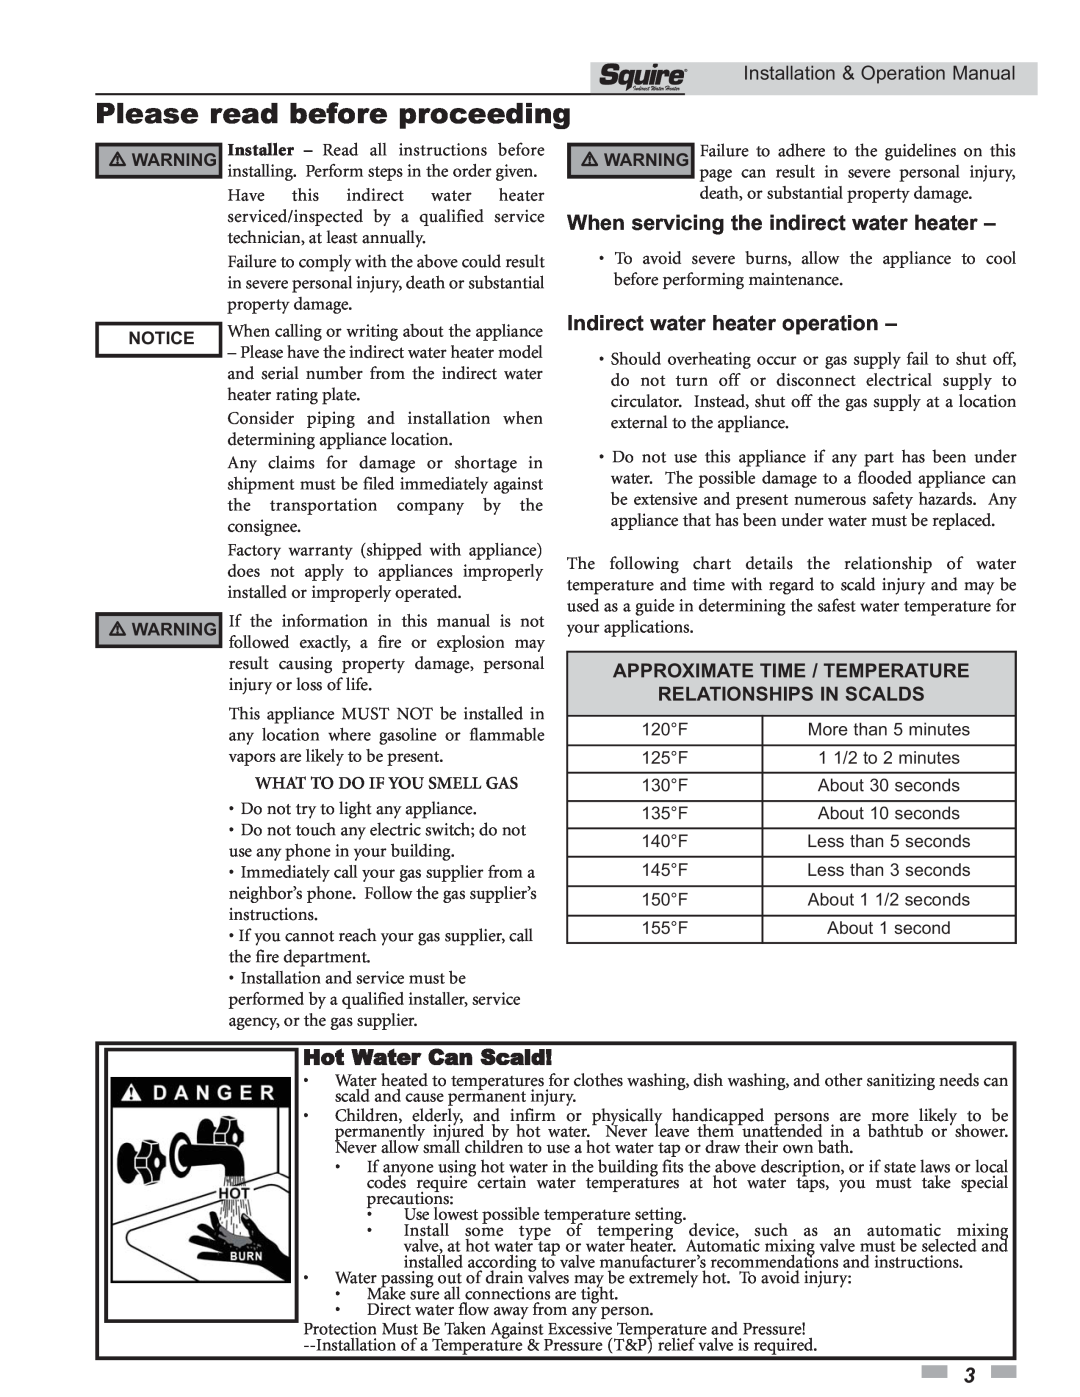 Lochinvar SSS03 Please read before proceeding, When servicing the indirect water heater, Indirect water heater operation 